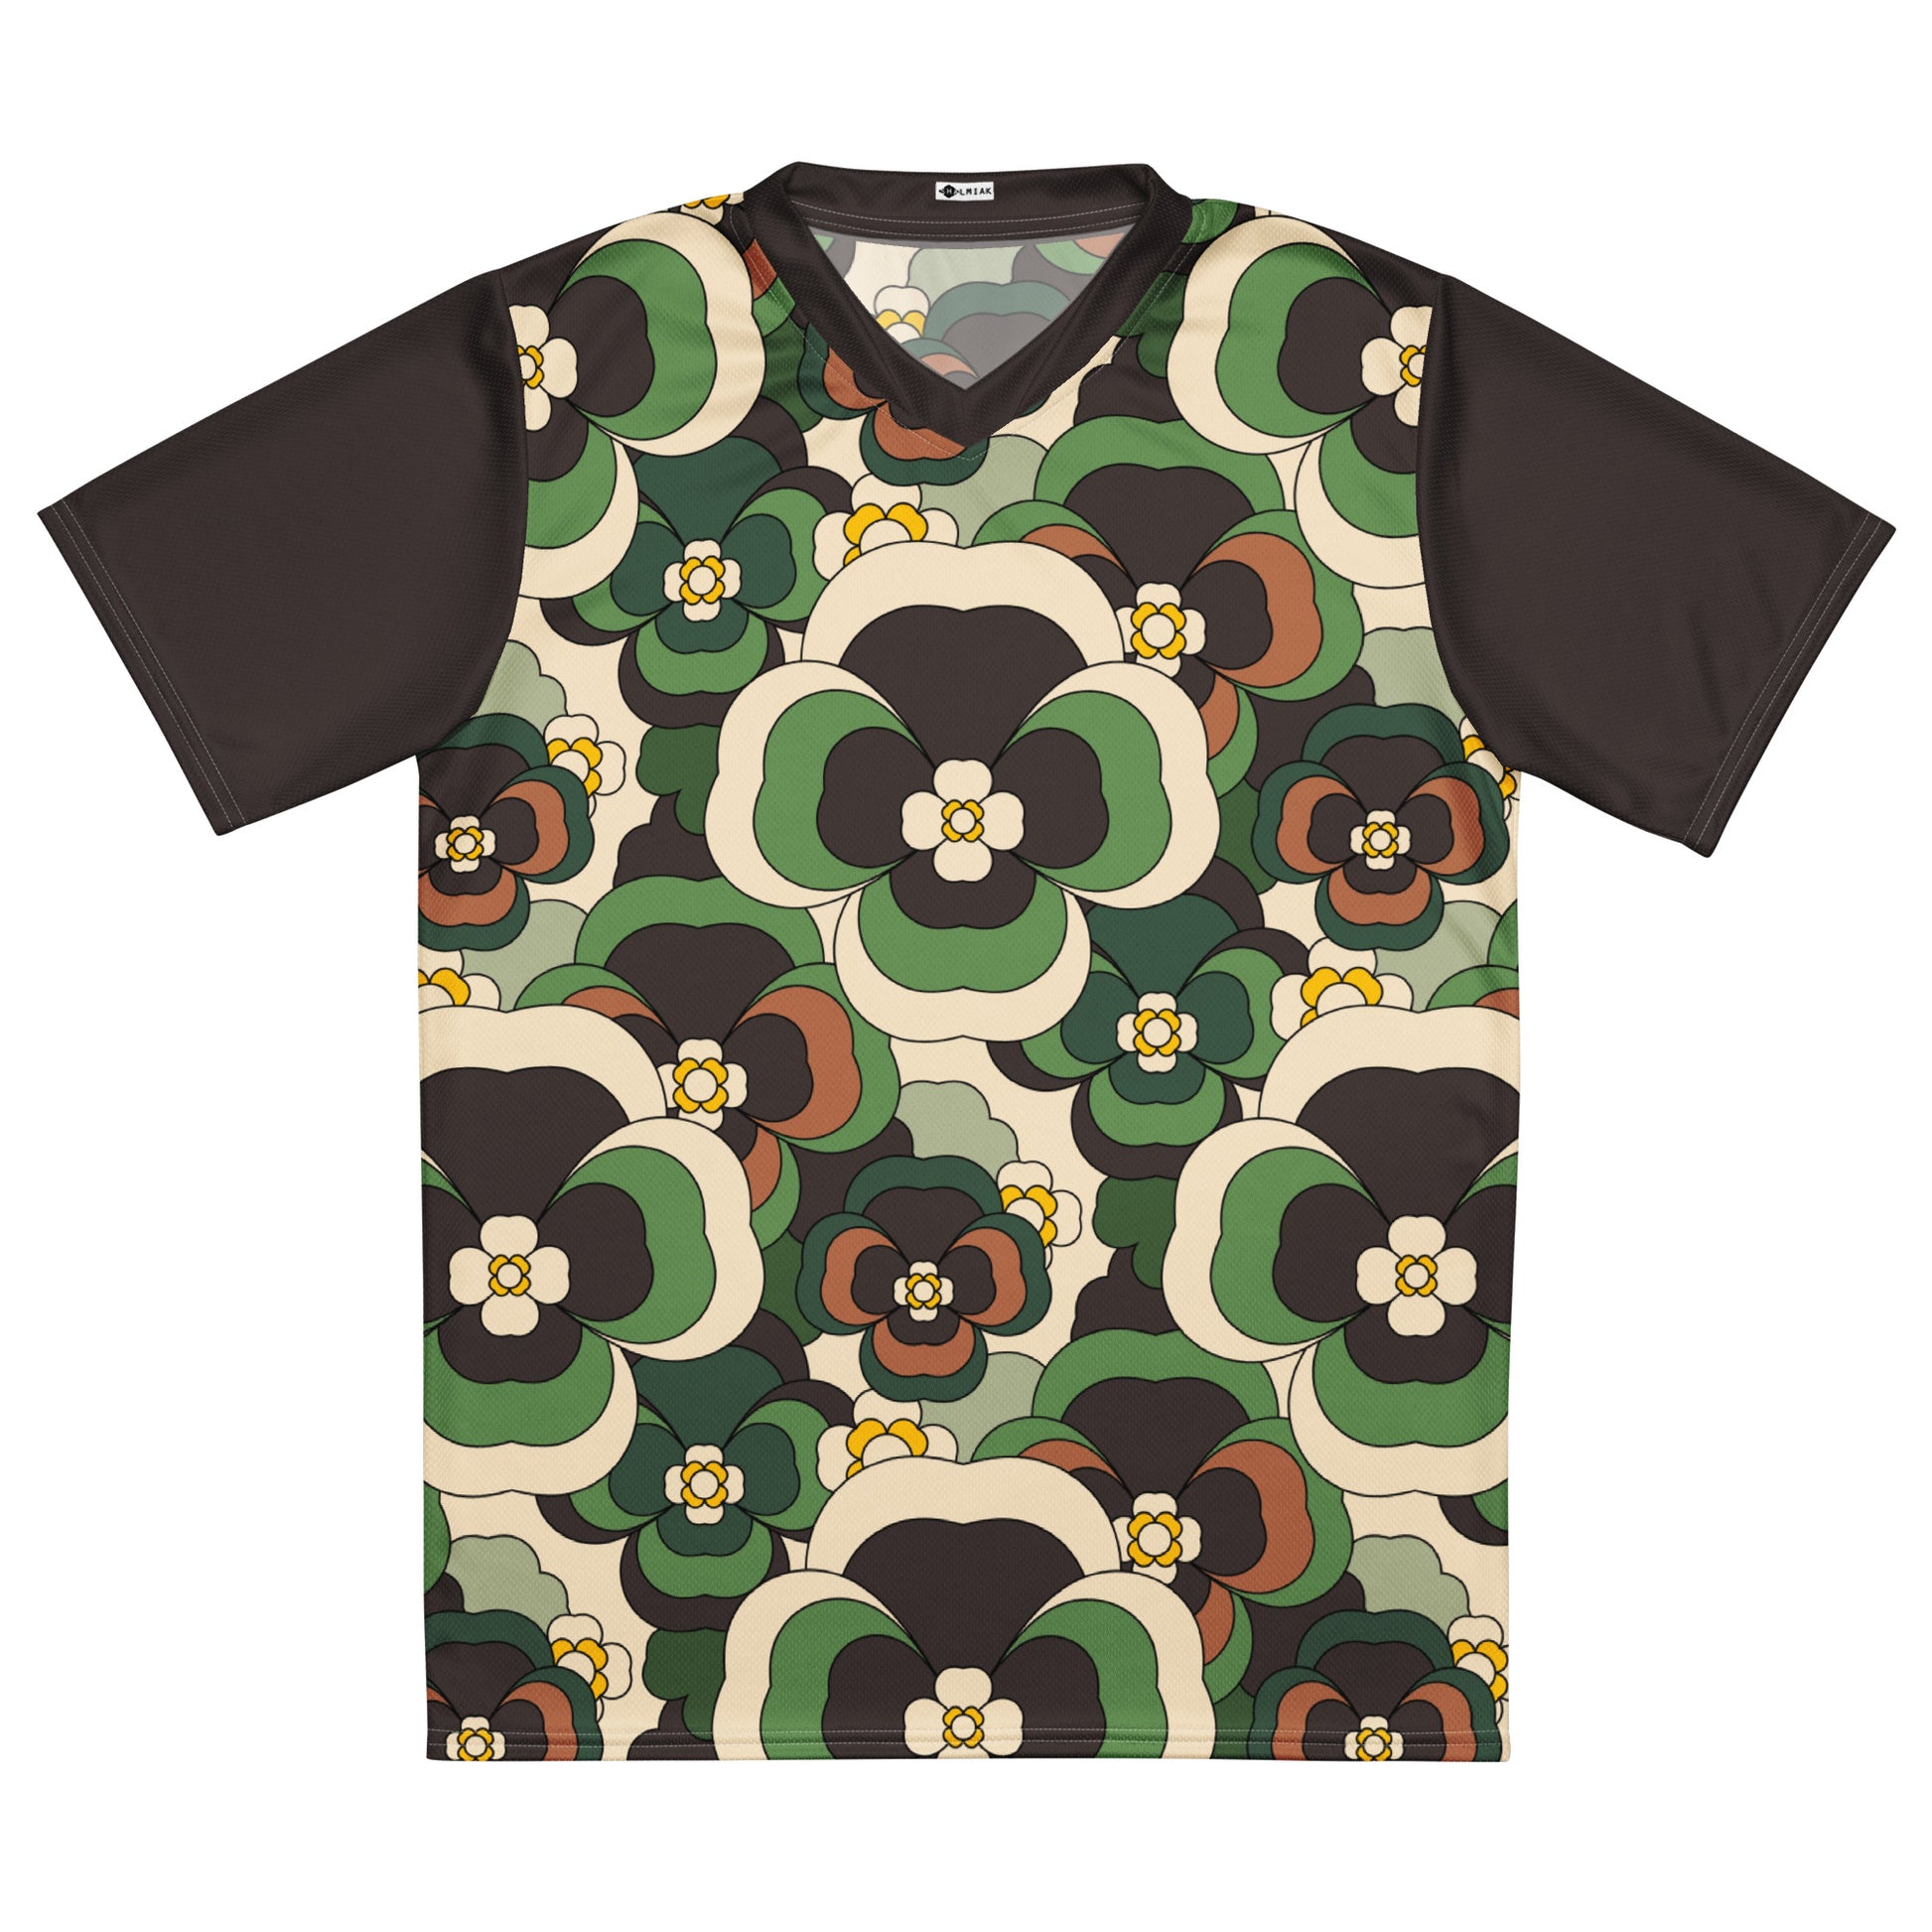 PANSY FANTASY green - Recycled unisex sports jersey